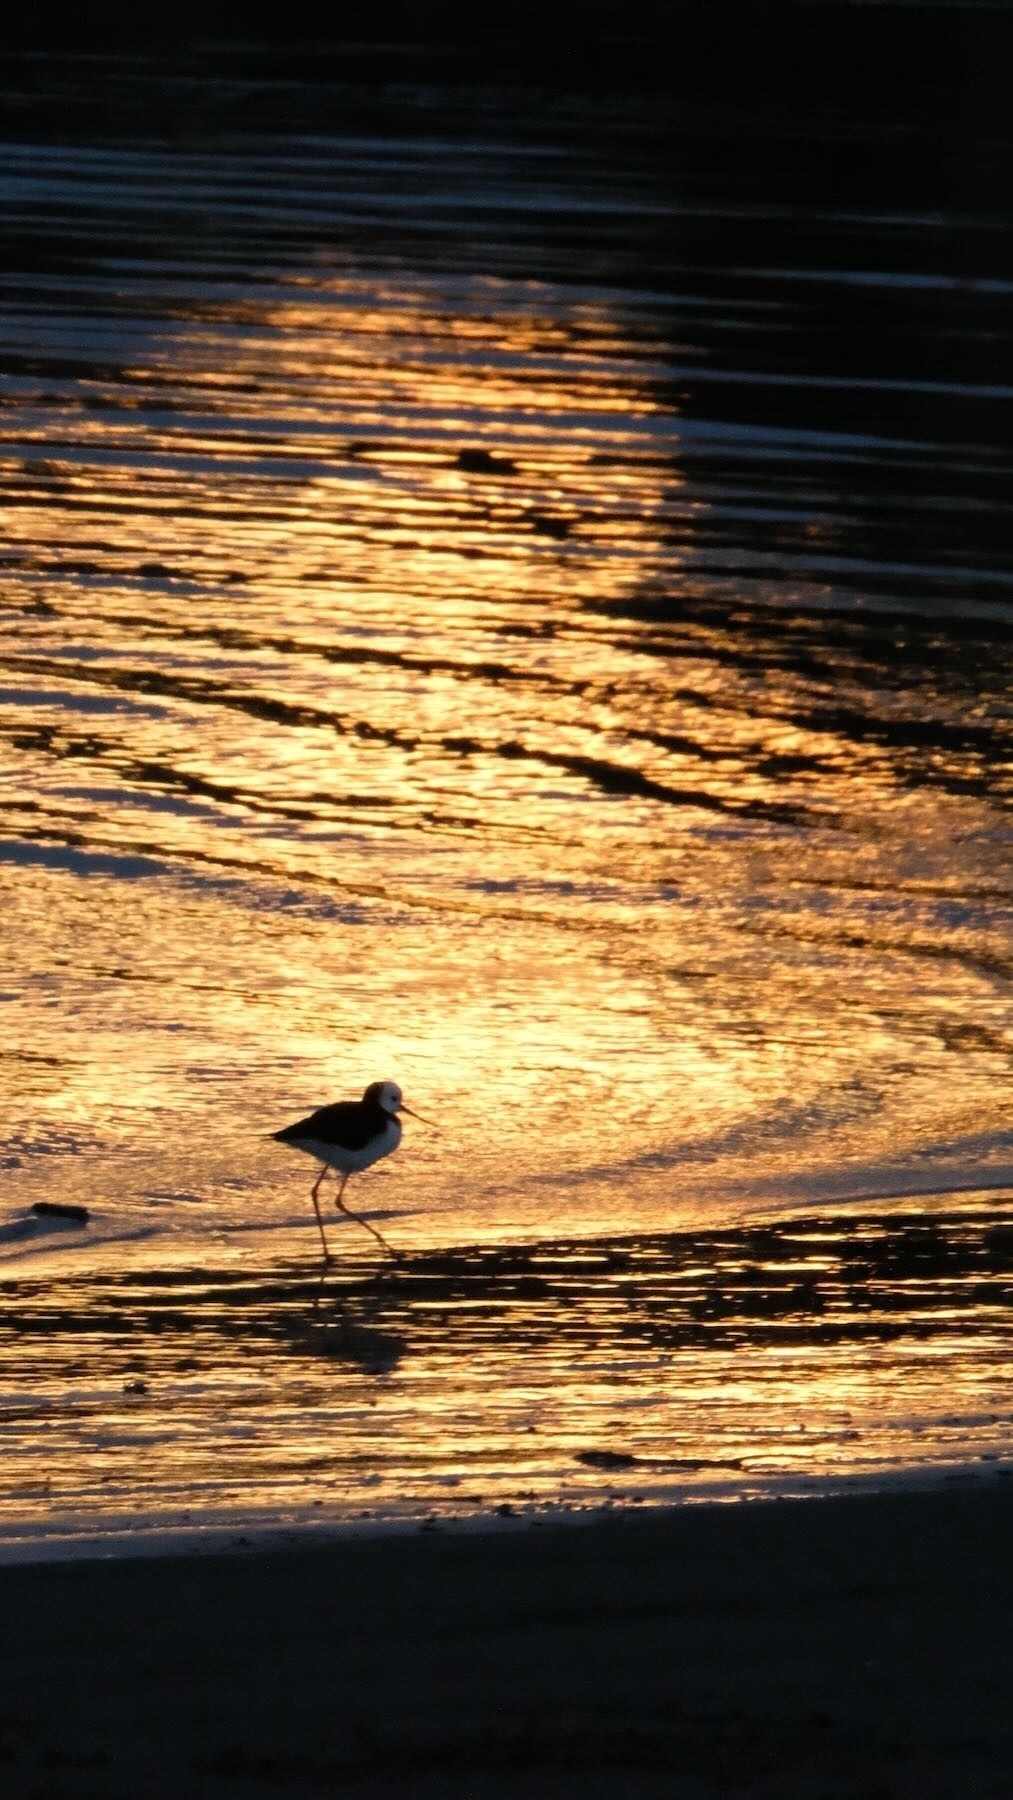 Pied Stilt - black and white long-legged bird in shallow water lit up gold by the rising sun. 